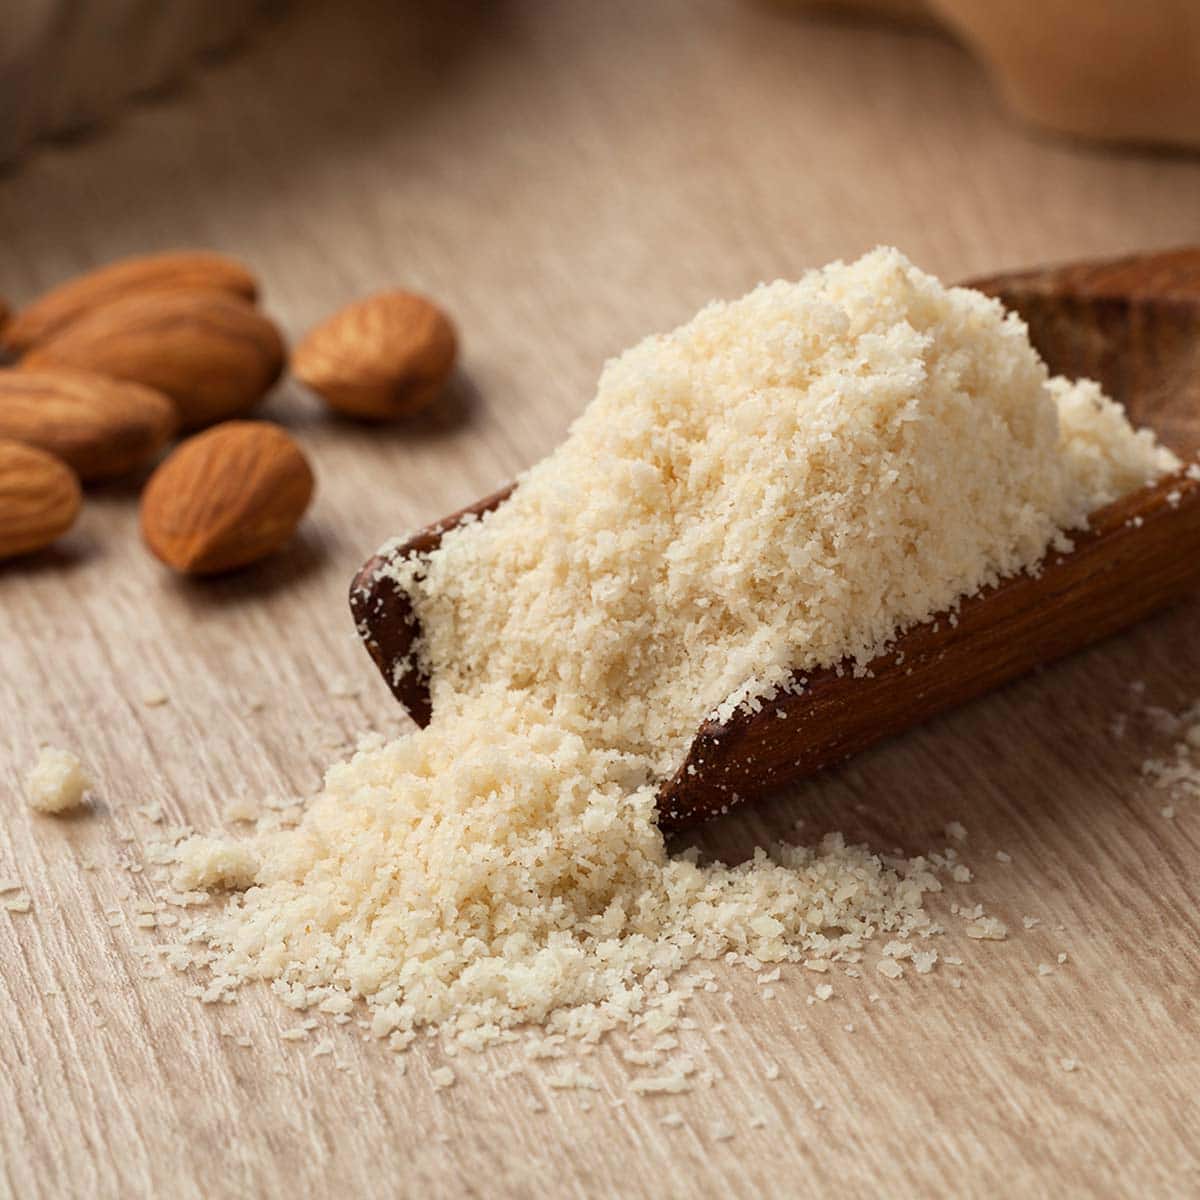 When almond flour goes off, it will acquire a slightly rancid smell. Also, the color with change, and it may become clumpy. Any of these changes could indicate your flour has gone off.